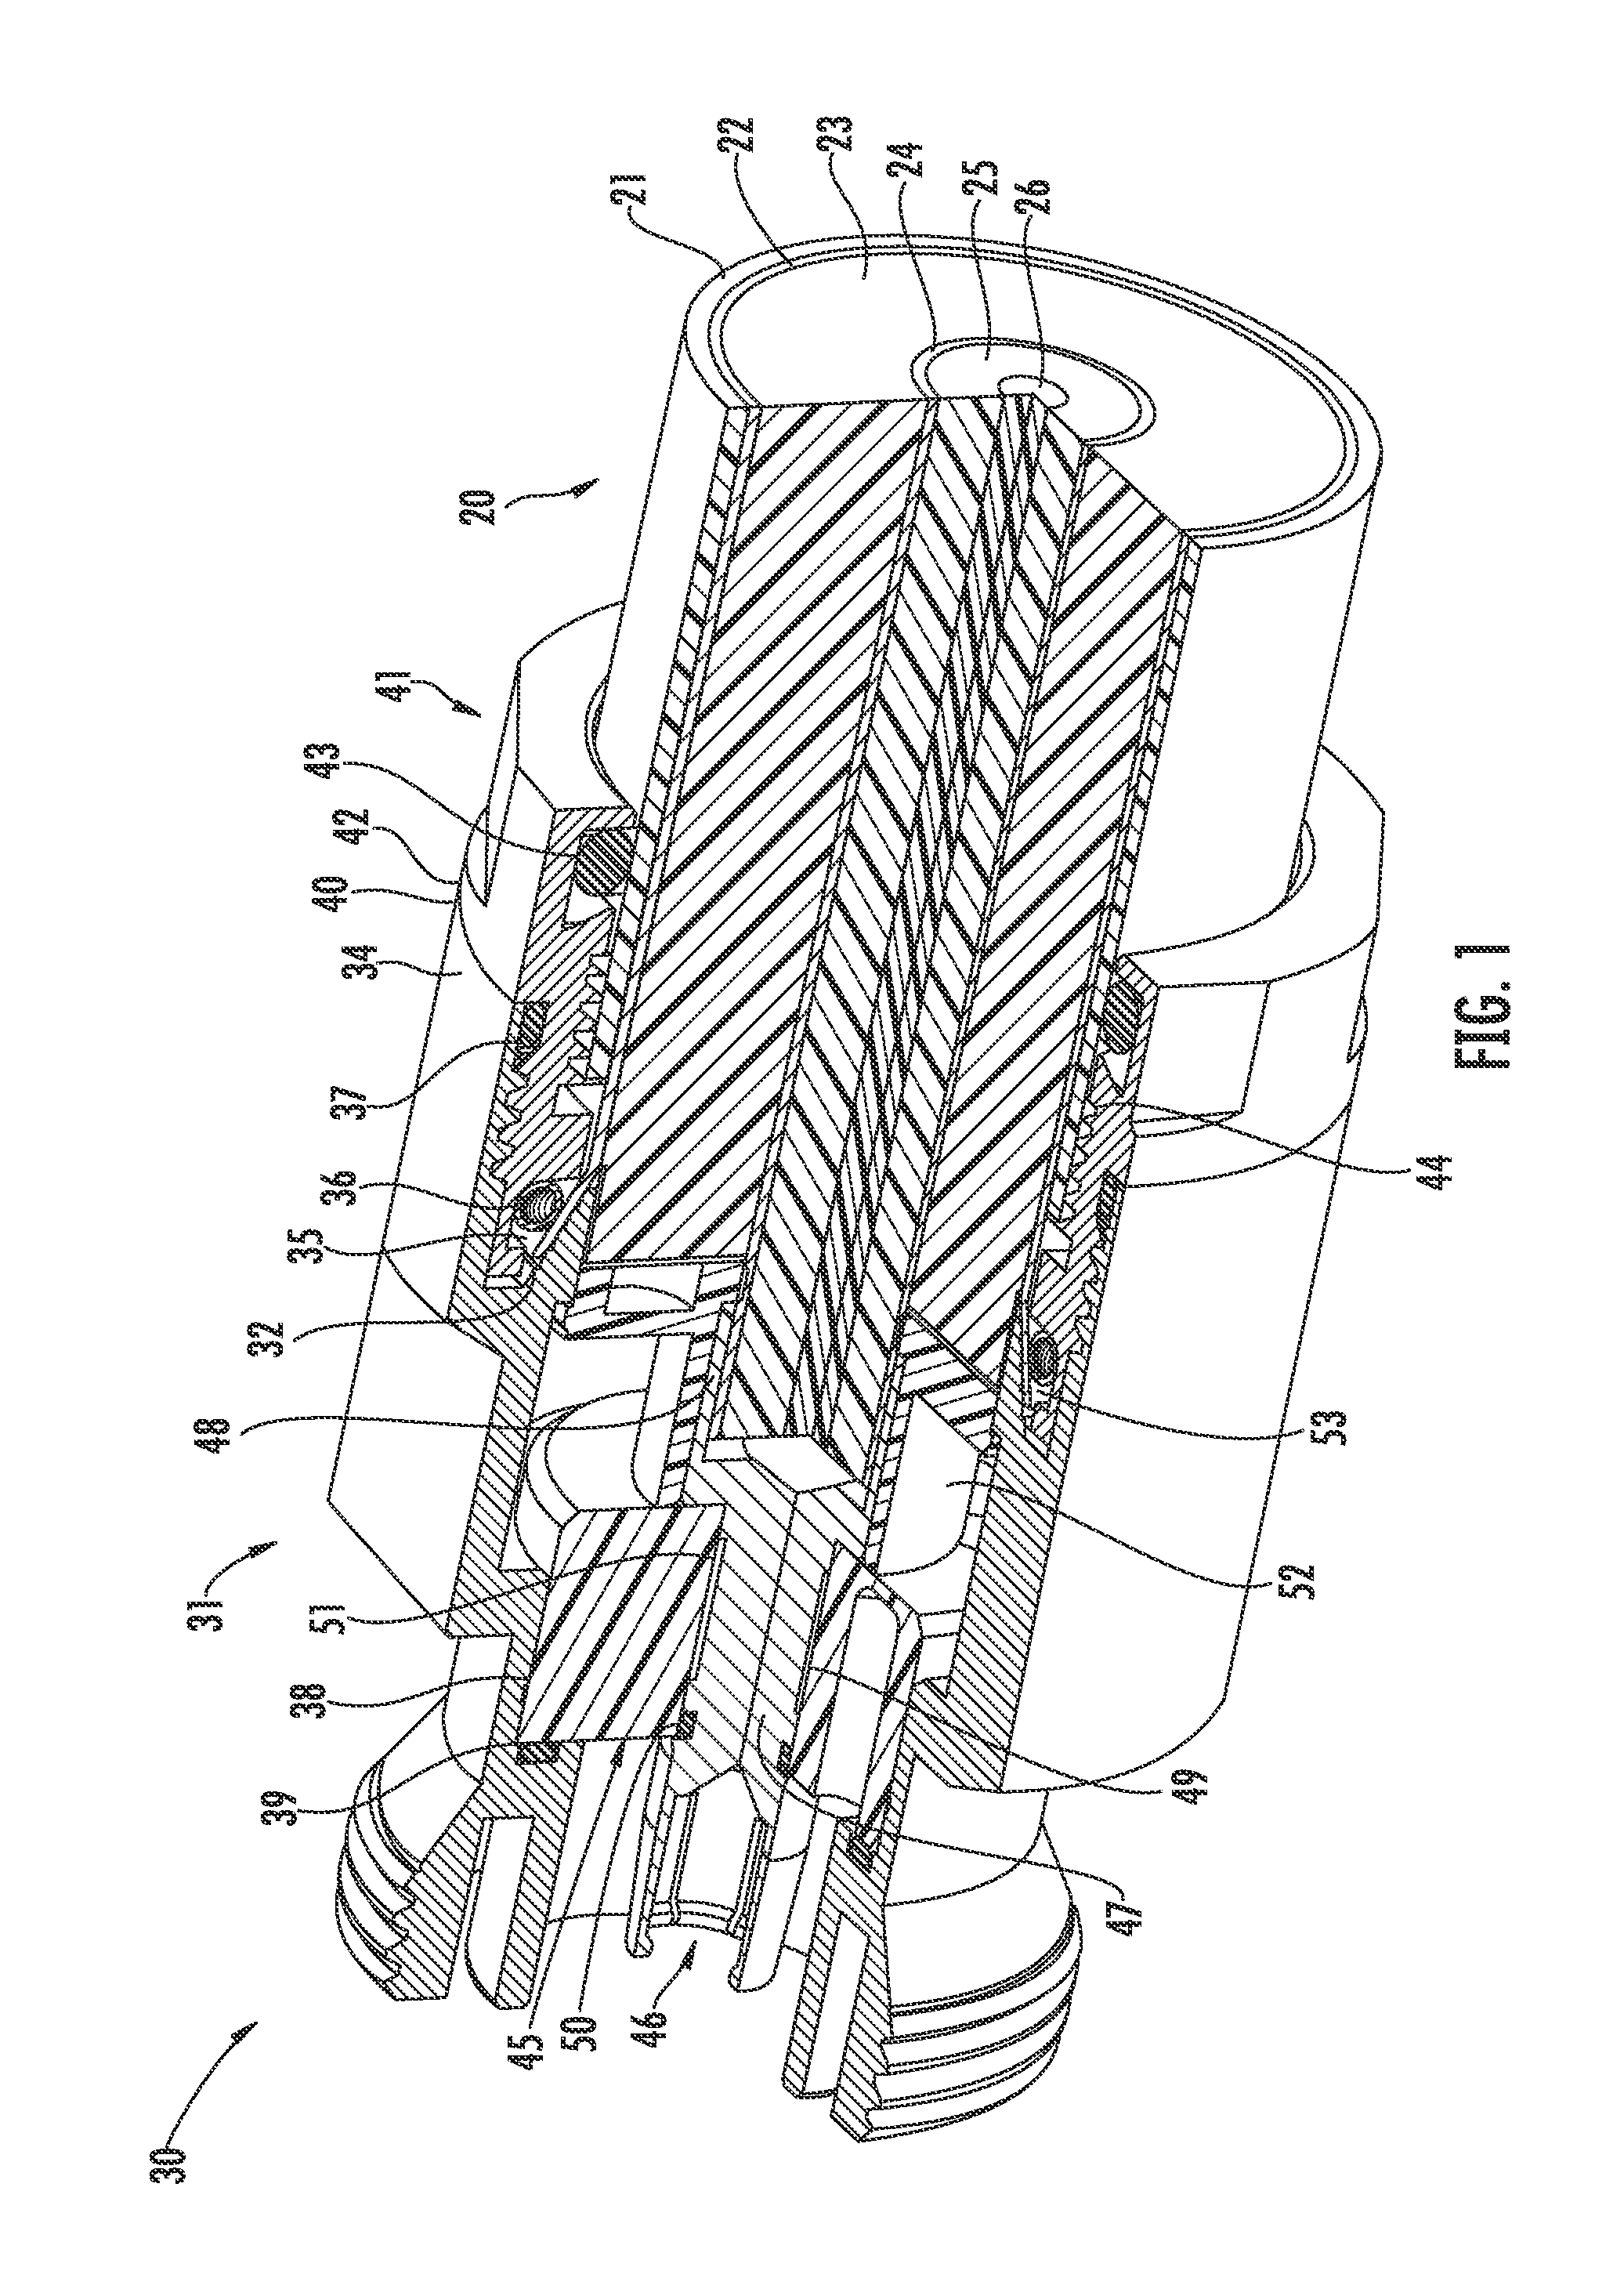 Connector for coaxial cable having rotational joint between insulator member and connector housing and associated methods